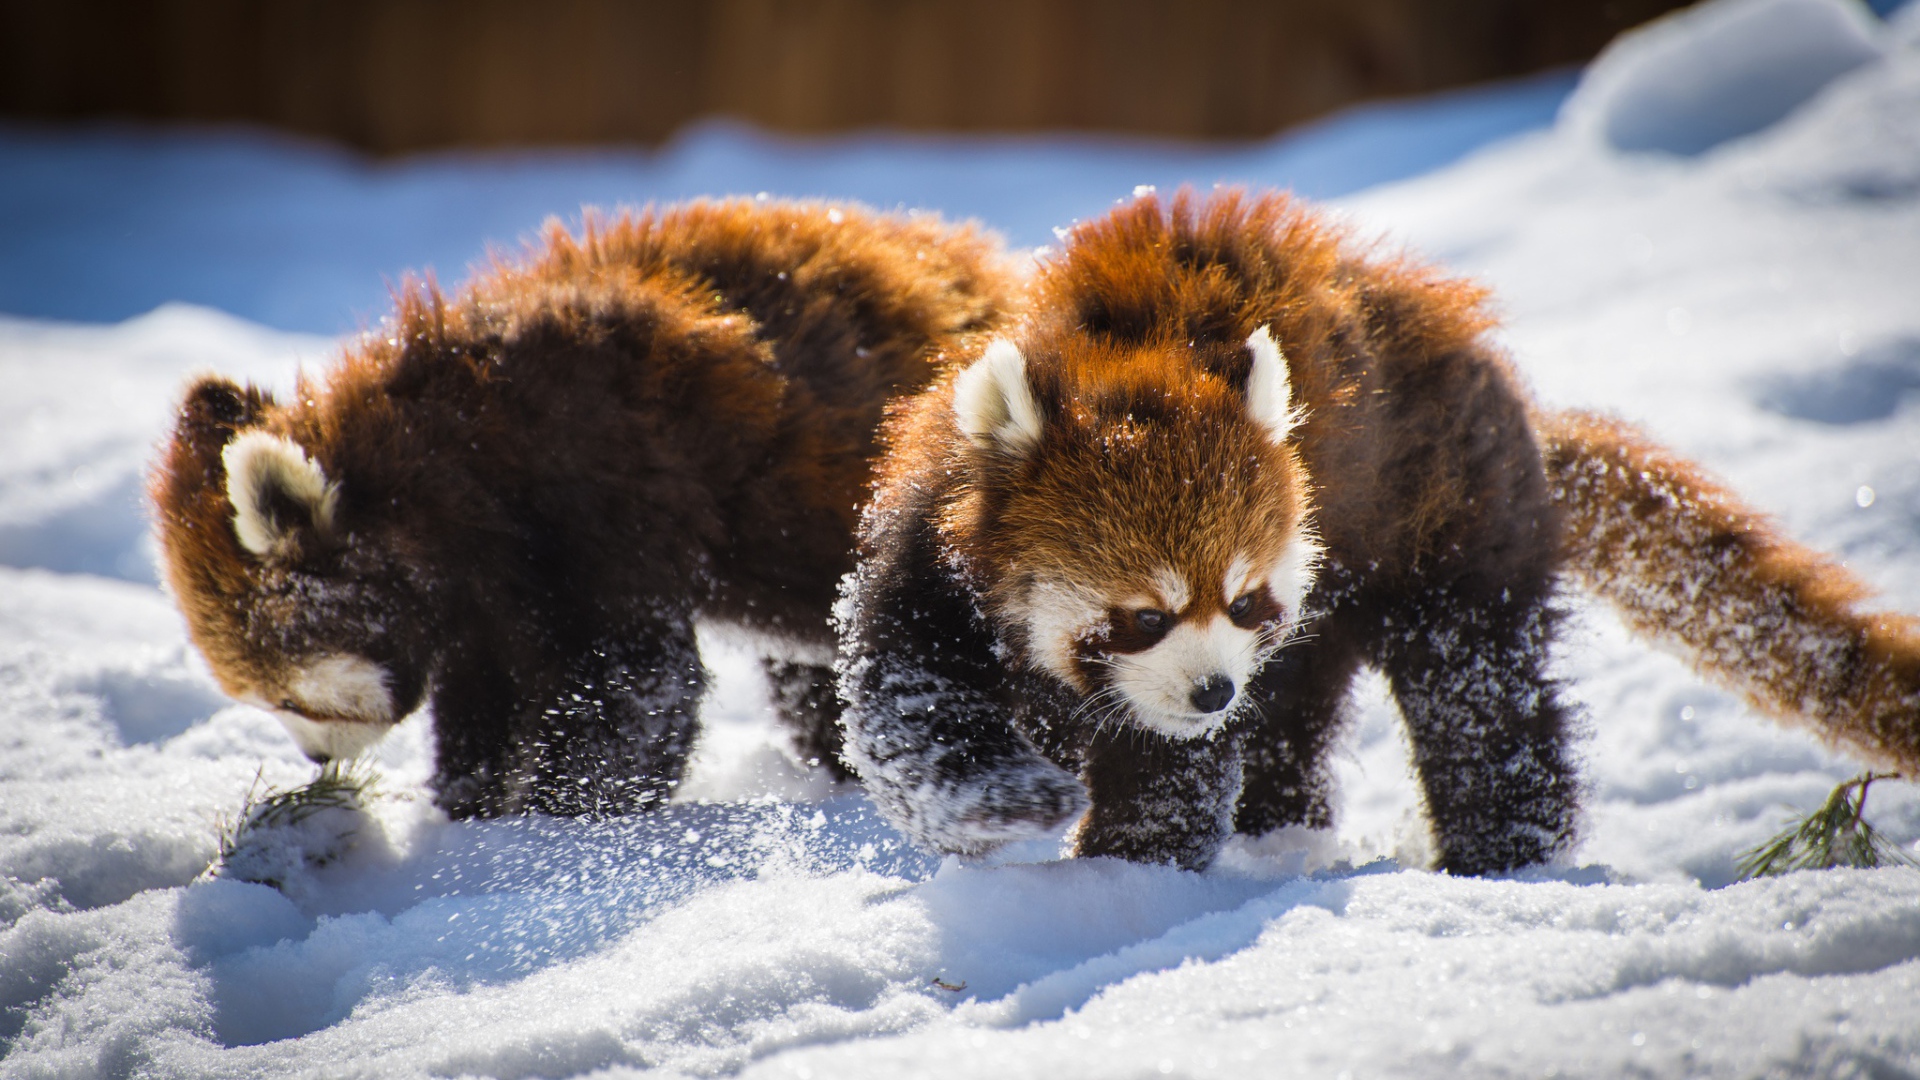 Two funny red pandas playing in the snow